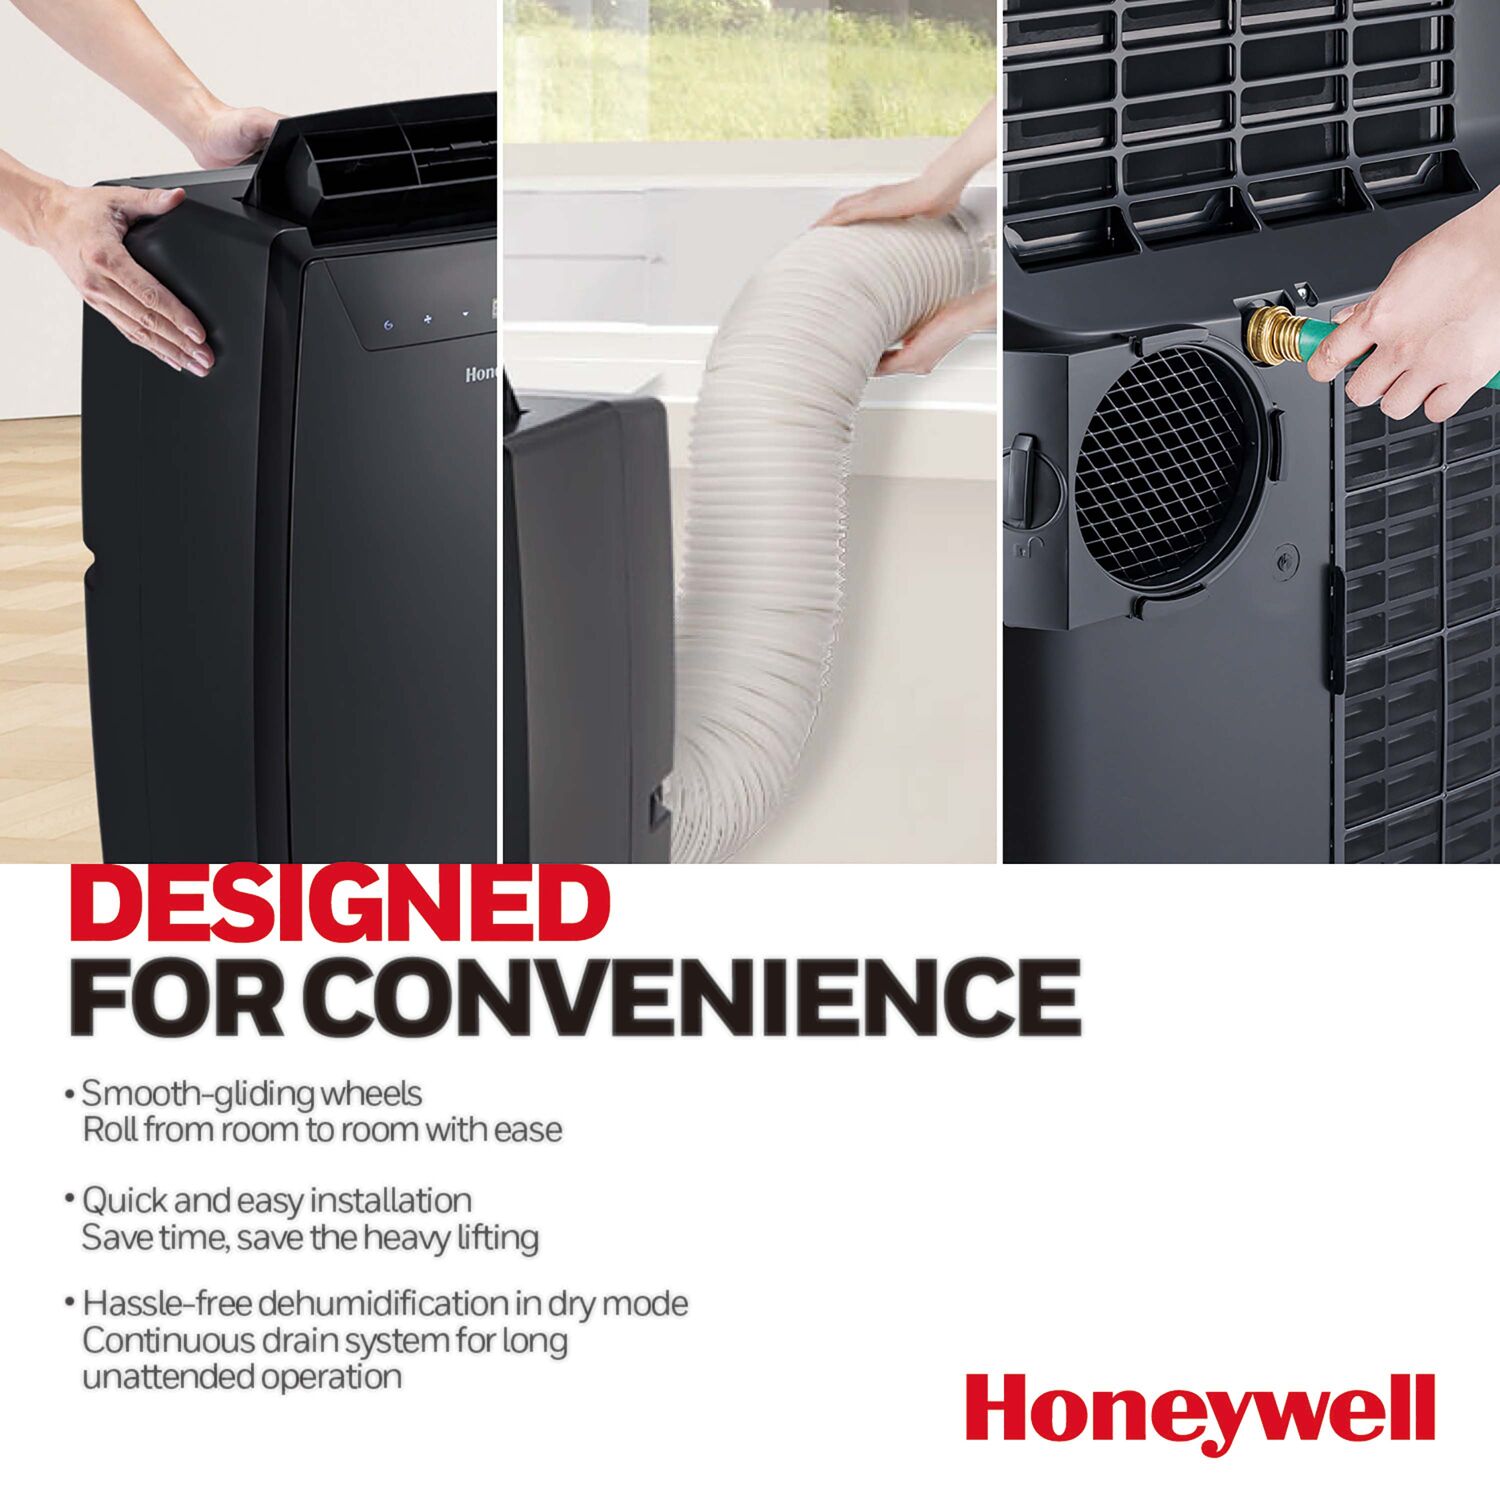 Honeywell 14,000 BTU Portable Air Conditioner, Dehumidifier and Fan - image 5 of 11